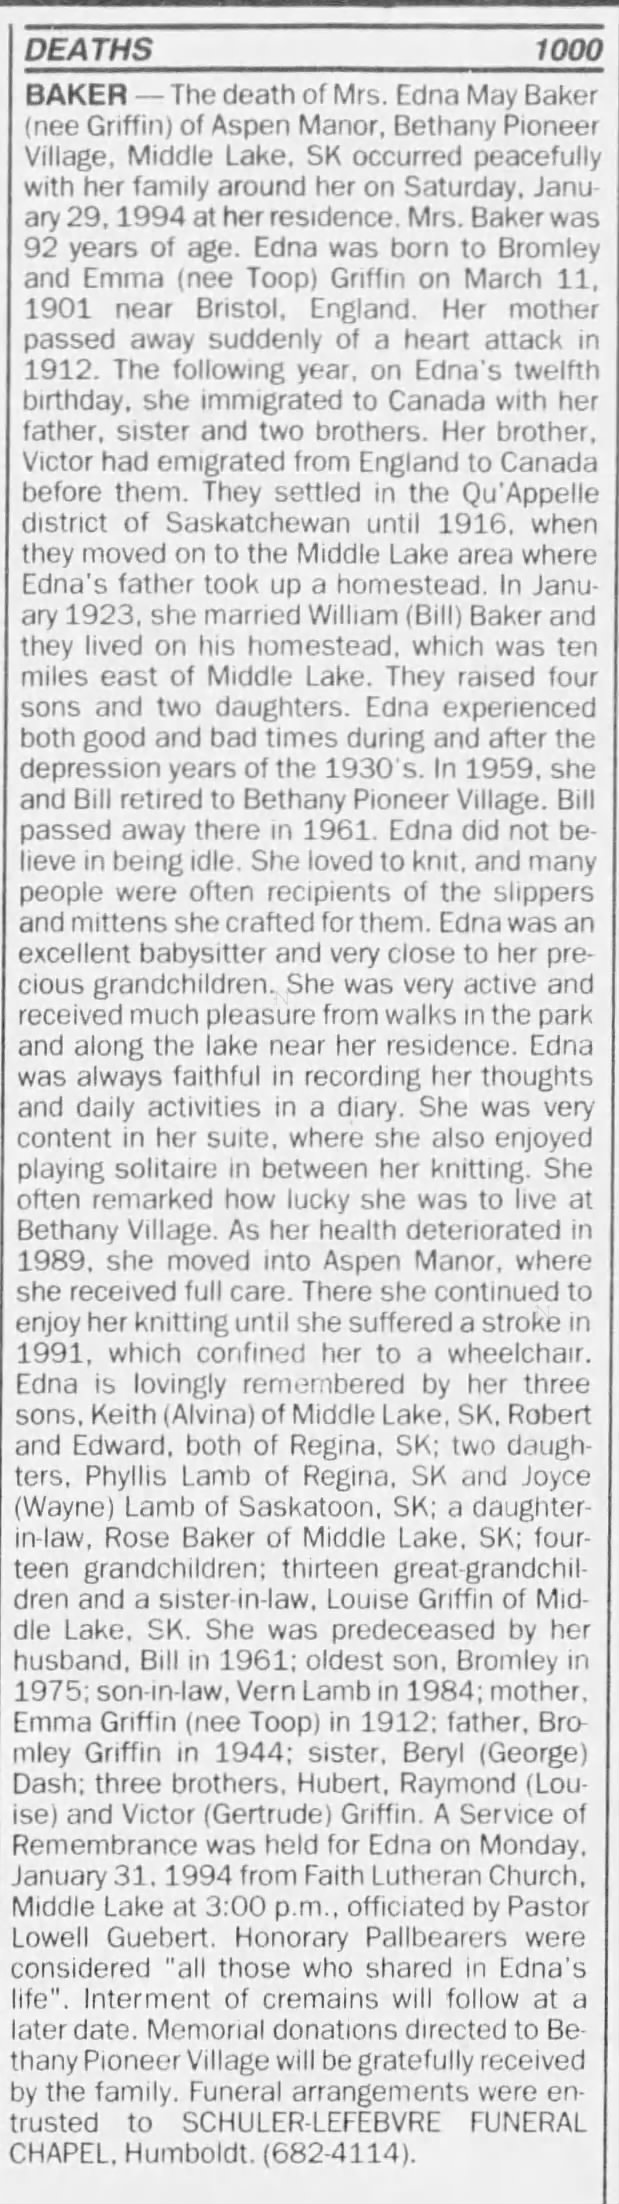 Obituary for Edna May BAKER, 1901-1994 (Aged 92)